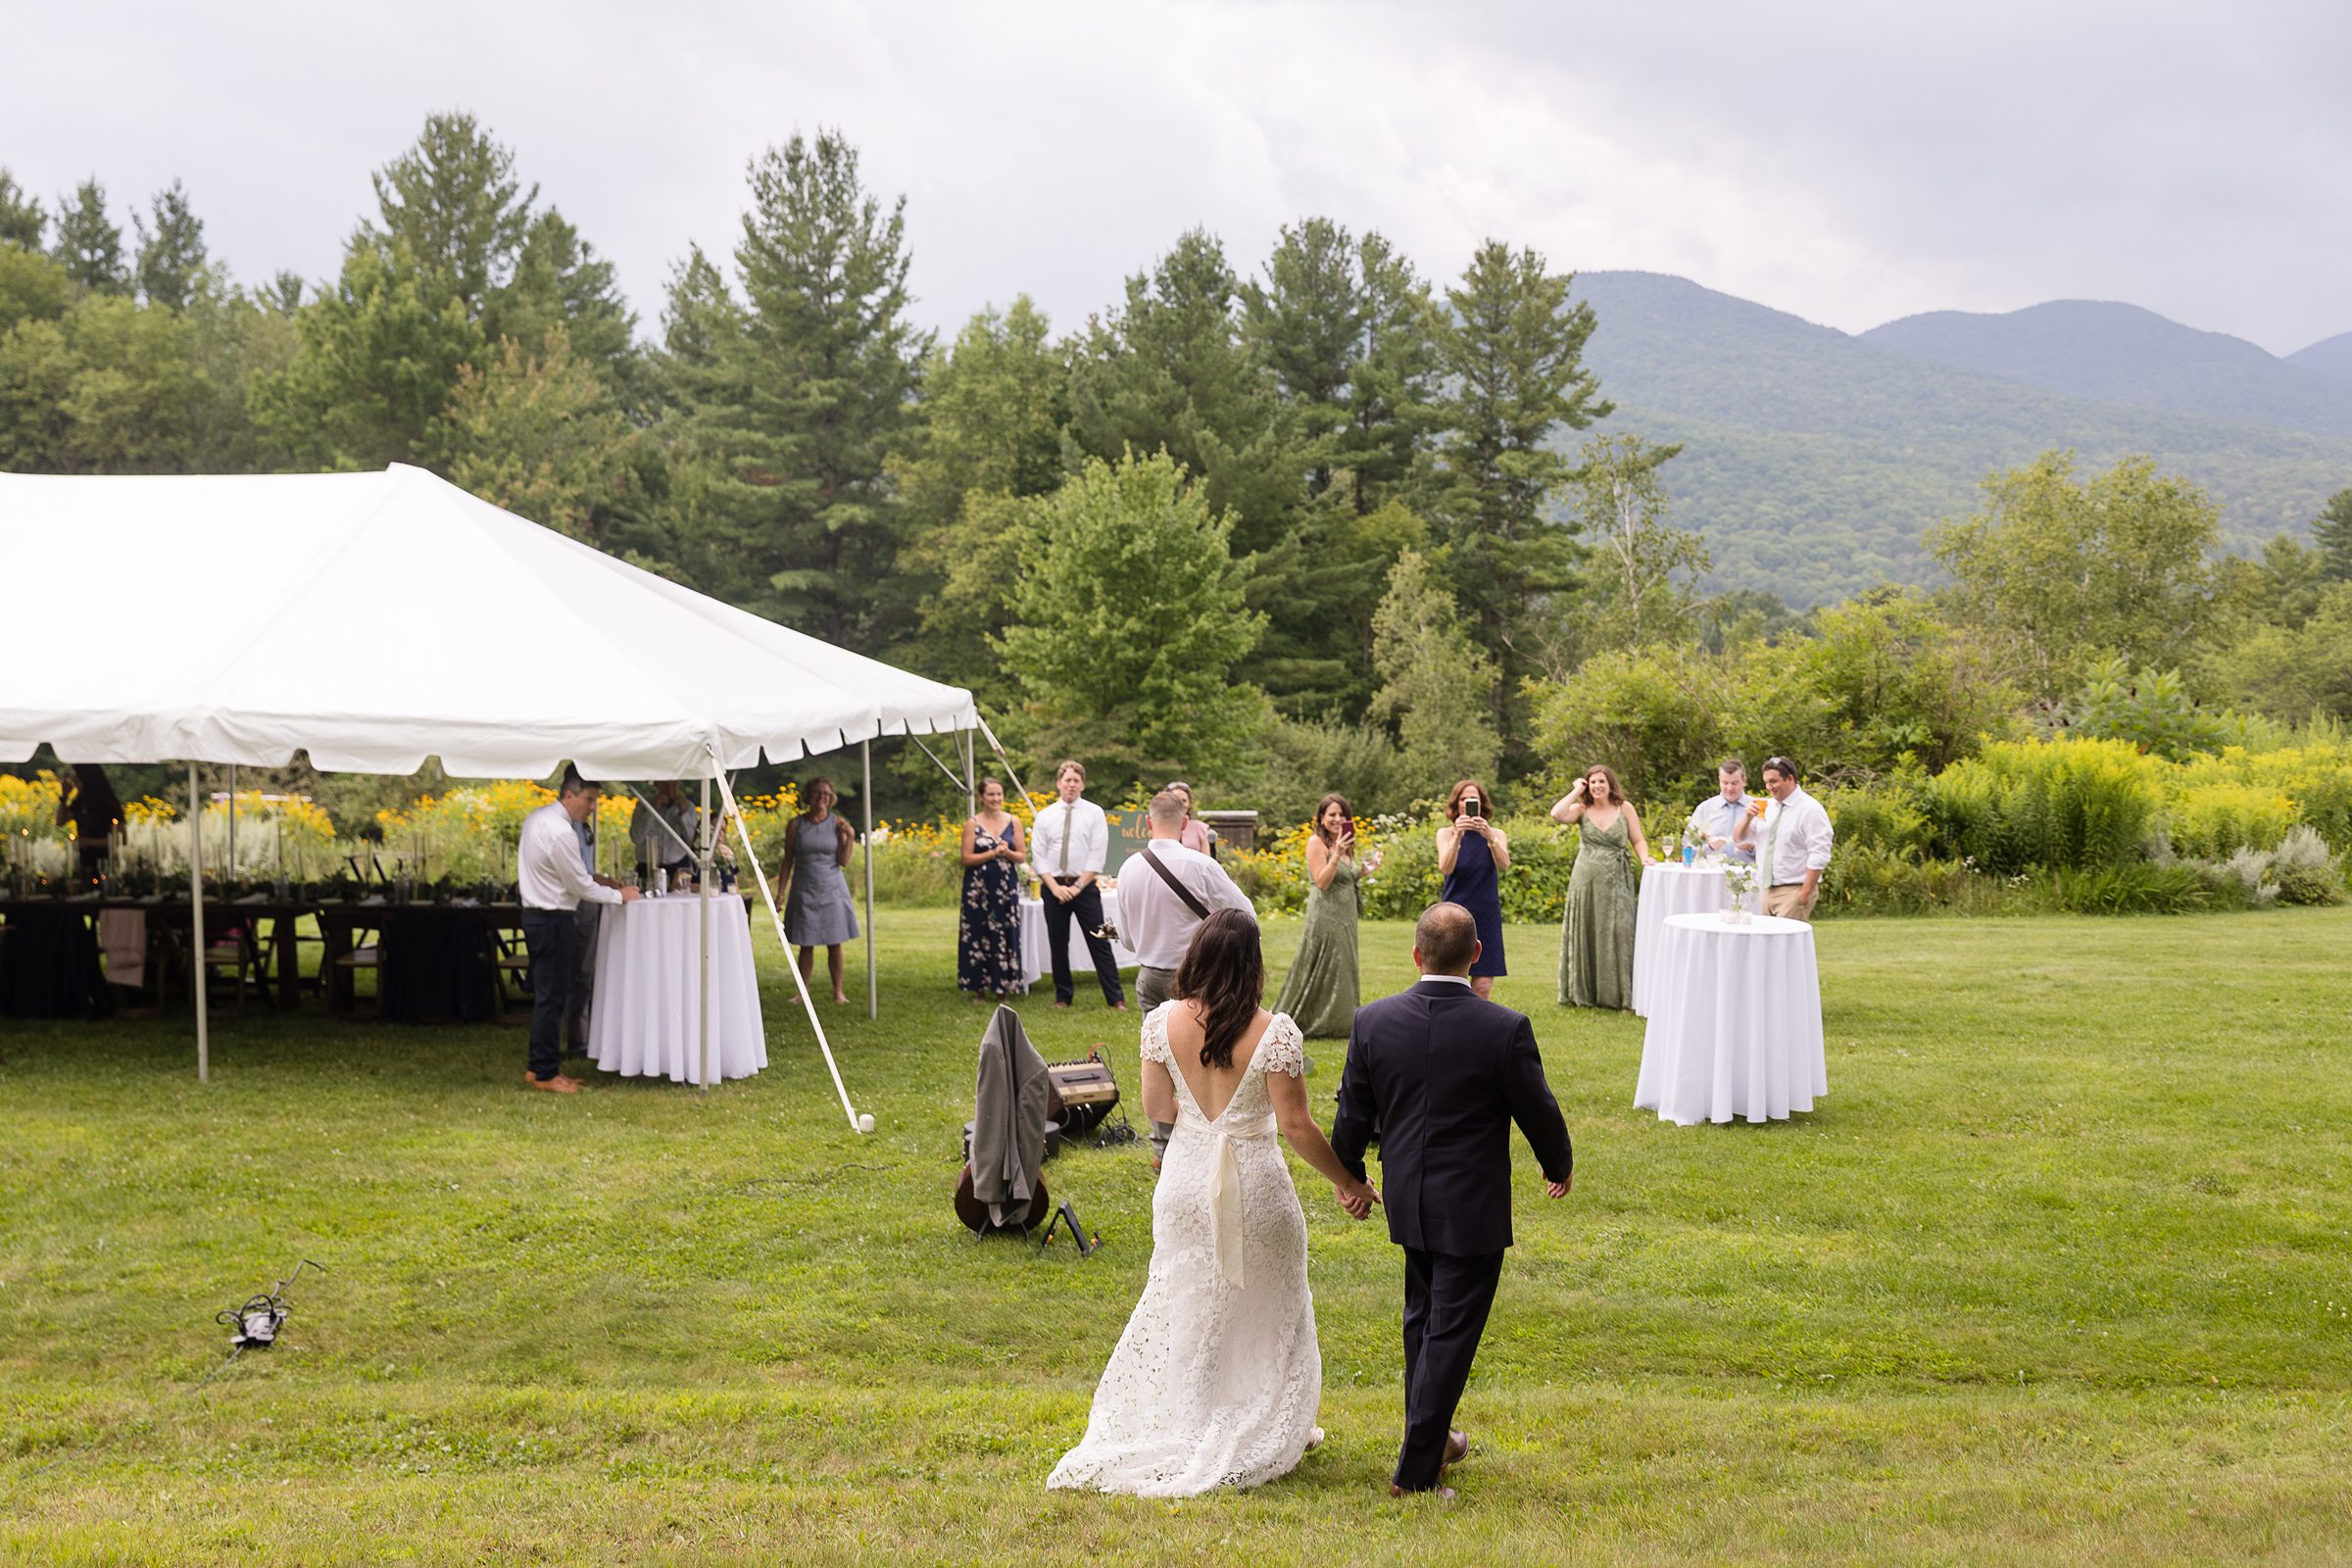 Tented reception with mountains views at the Stowehof Inn